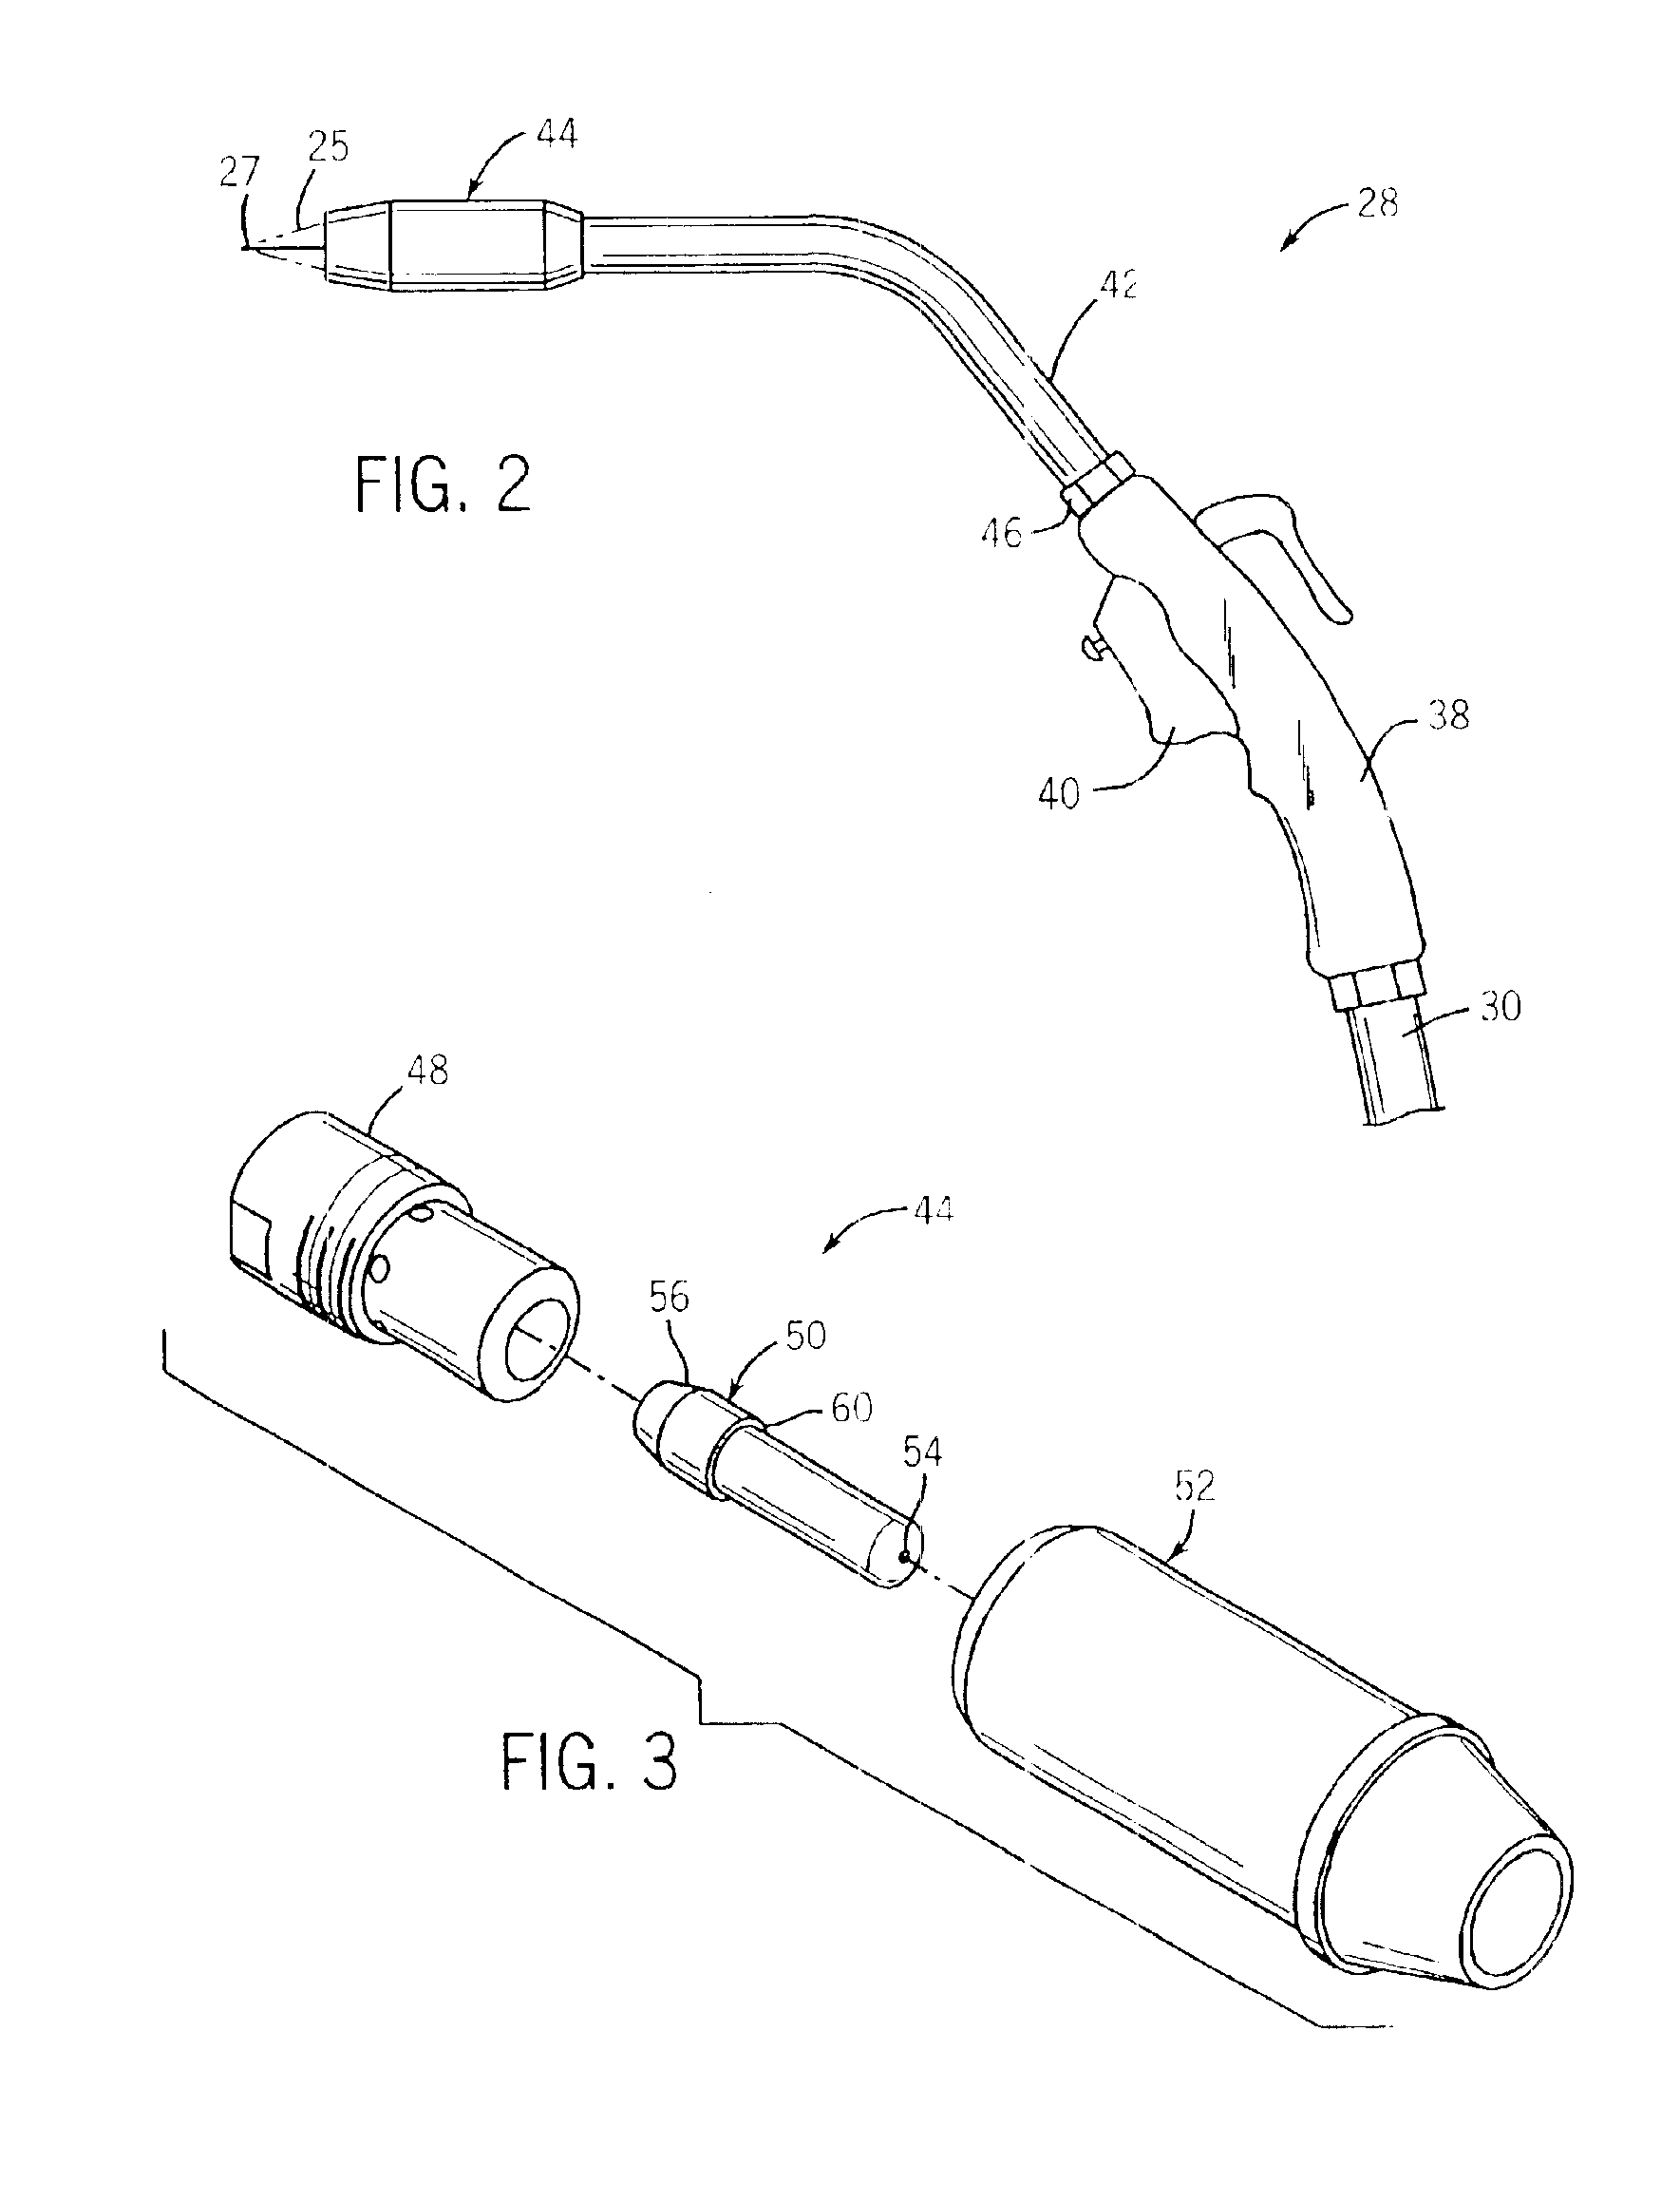 Welding gun having a removable nozzle end portion and method for operating same